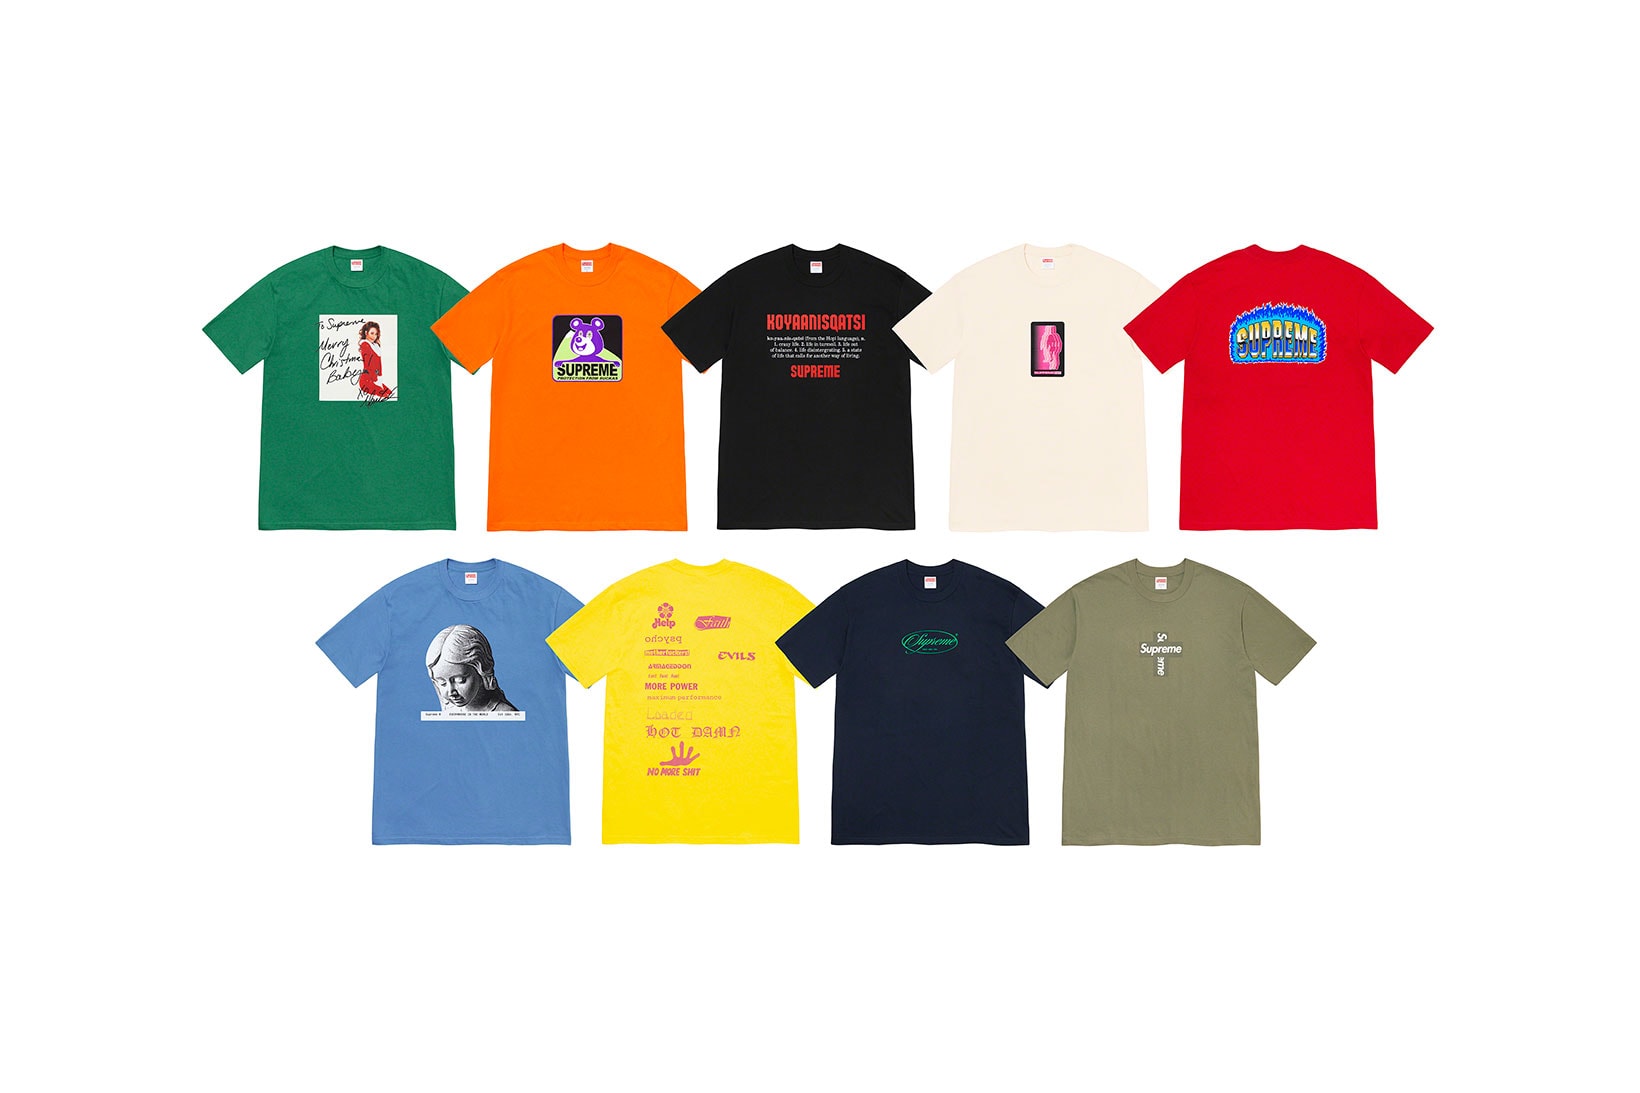 supreme new york graphic winter tees t shirts collection green red mariah carey